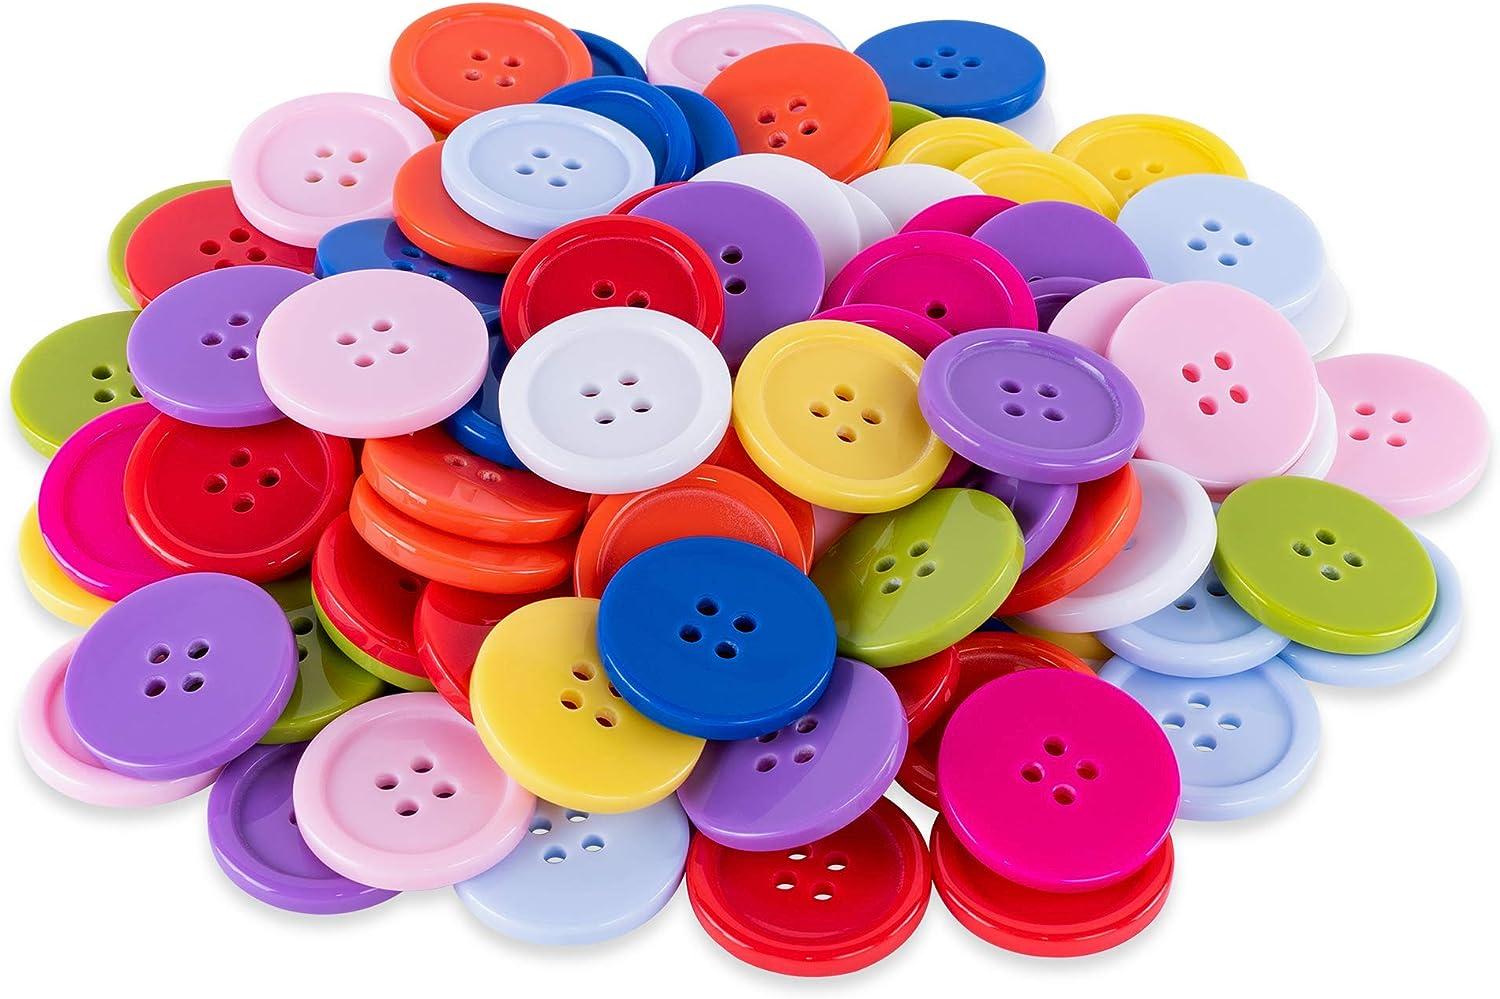 100 Pack 1 Inch Buttons Flatback Sewing Colored for Arts & Crafts, Fashion  Clothing, DIY Projects (Hot Pink)